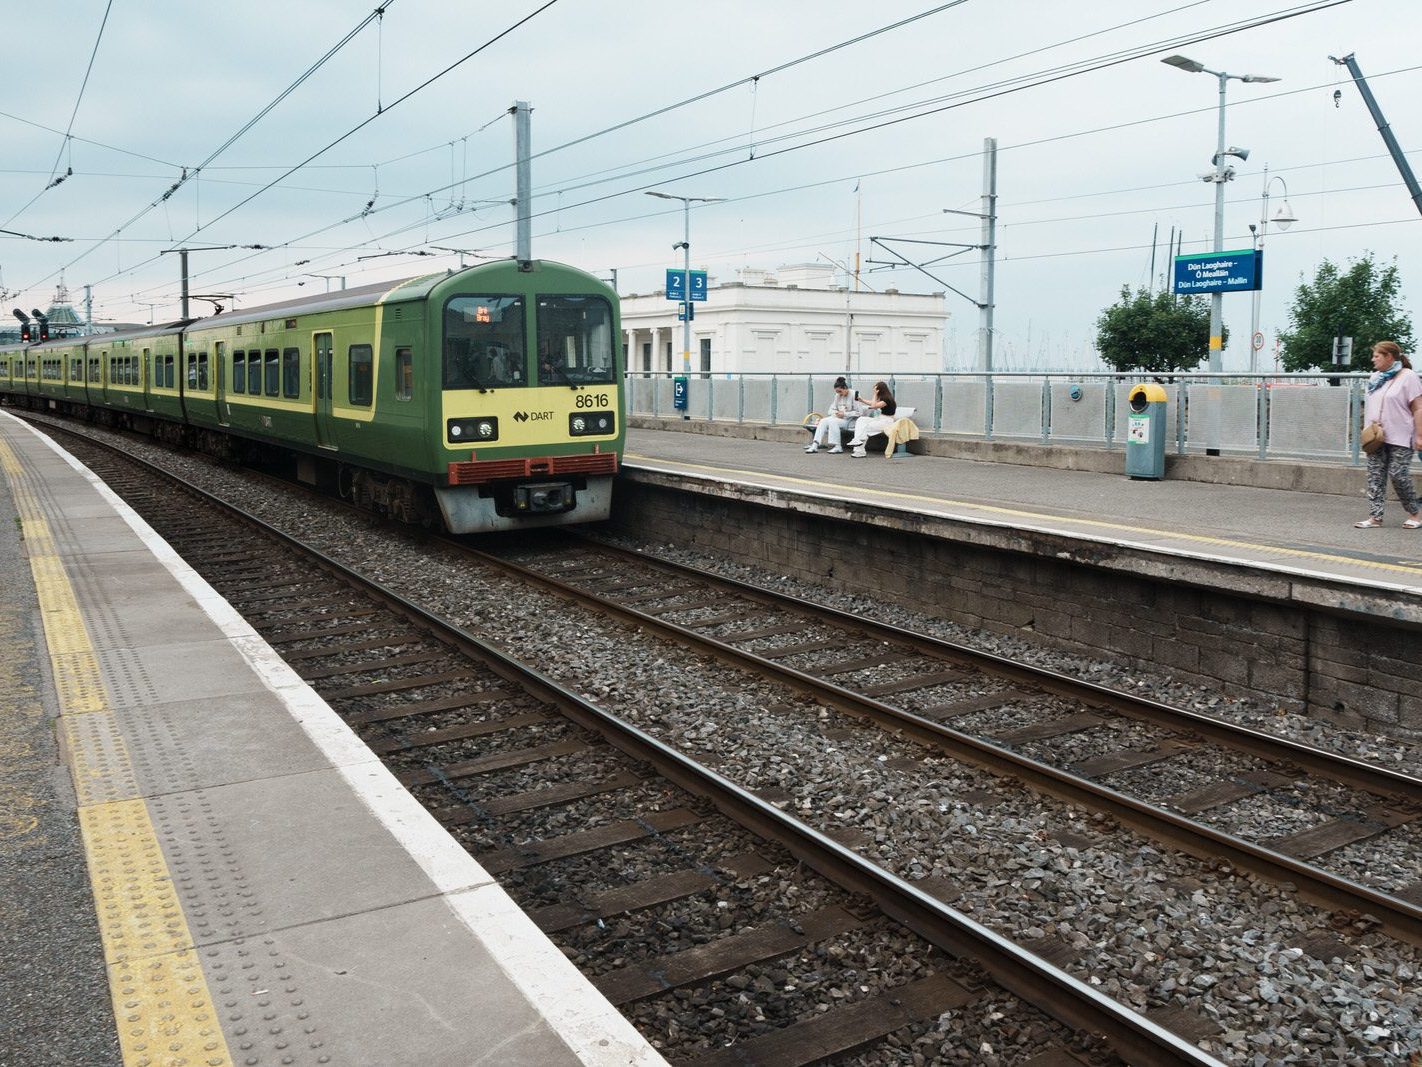 DID YOU KNOW THAT IT IS MALLIN STATION [THE TRAIN STATION IN DUN LAOGHAIRE] 002